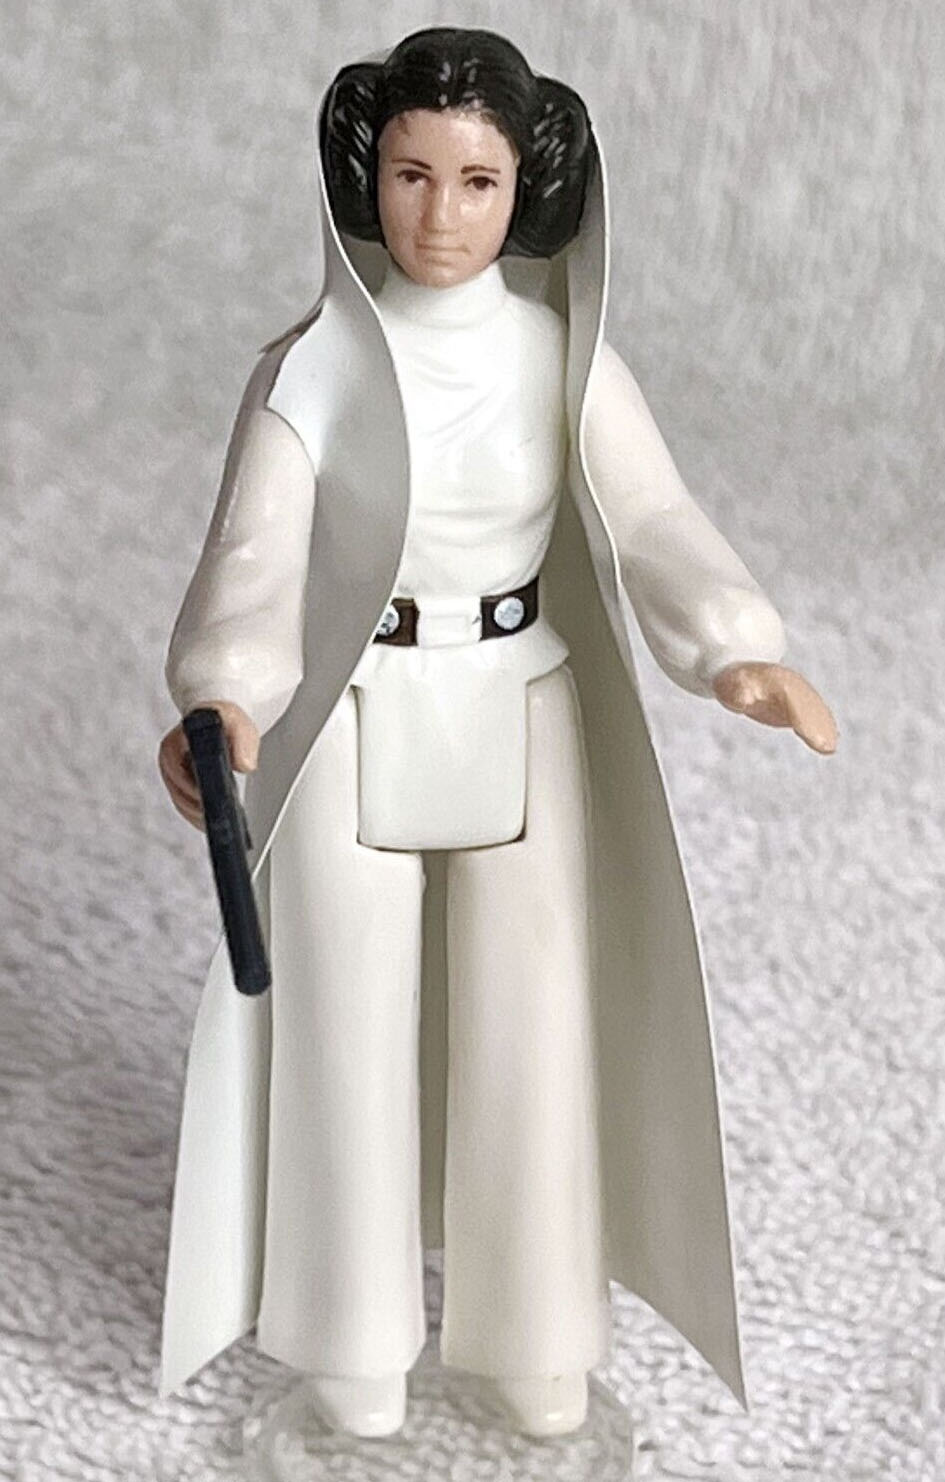 Star Wars Princess Leia 3.75 in Action Figure (Episode 4) - Used